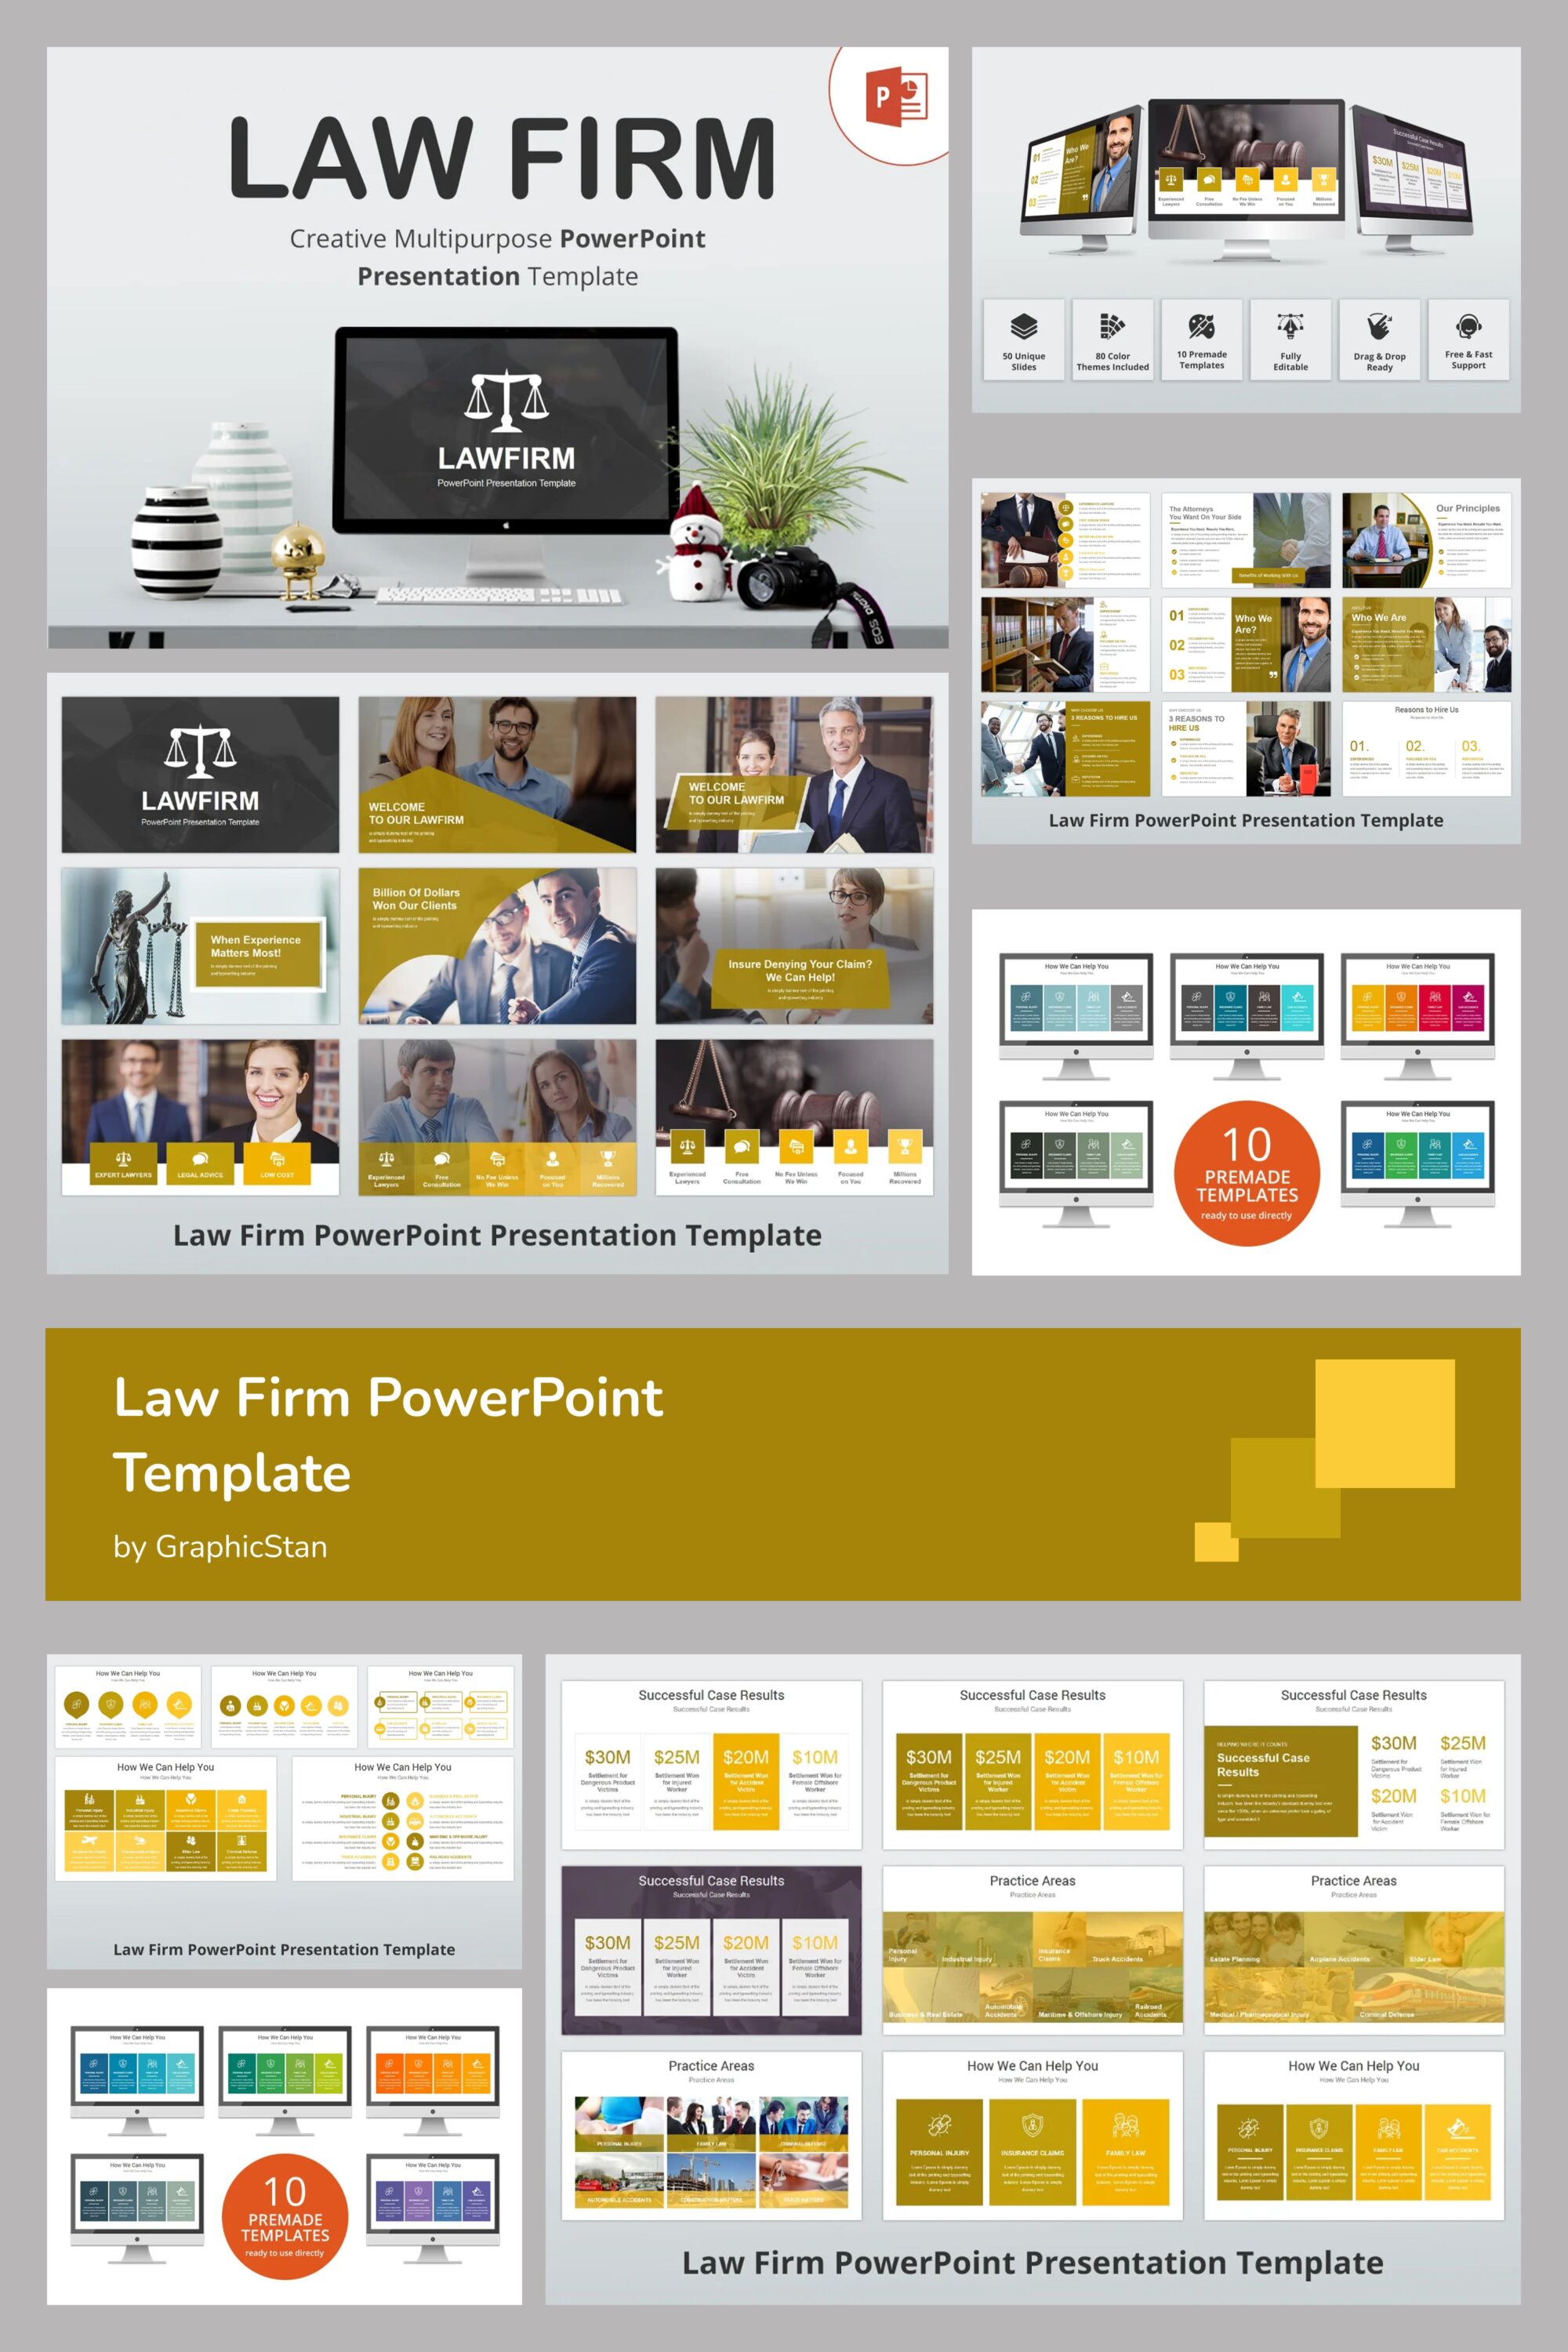 law firm powerpoint template pint1.